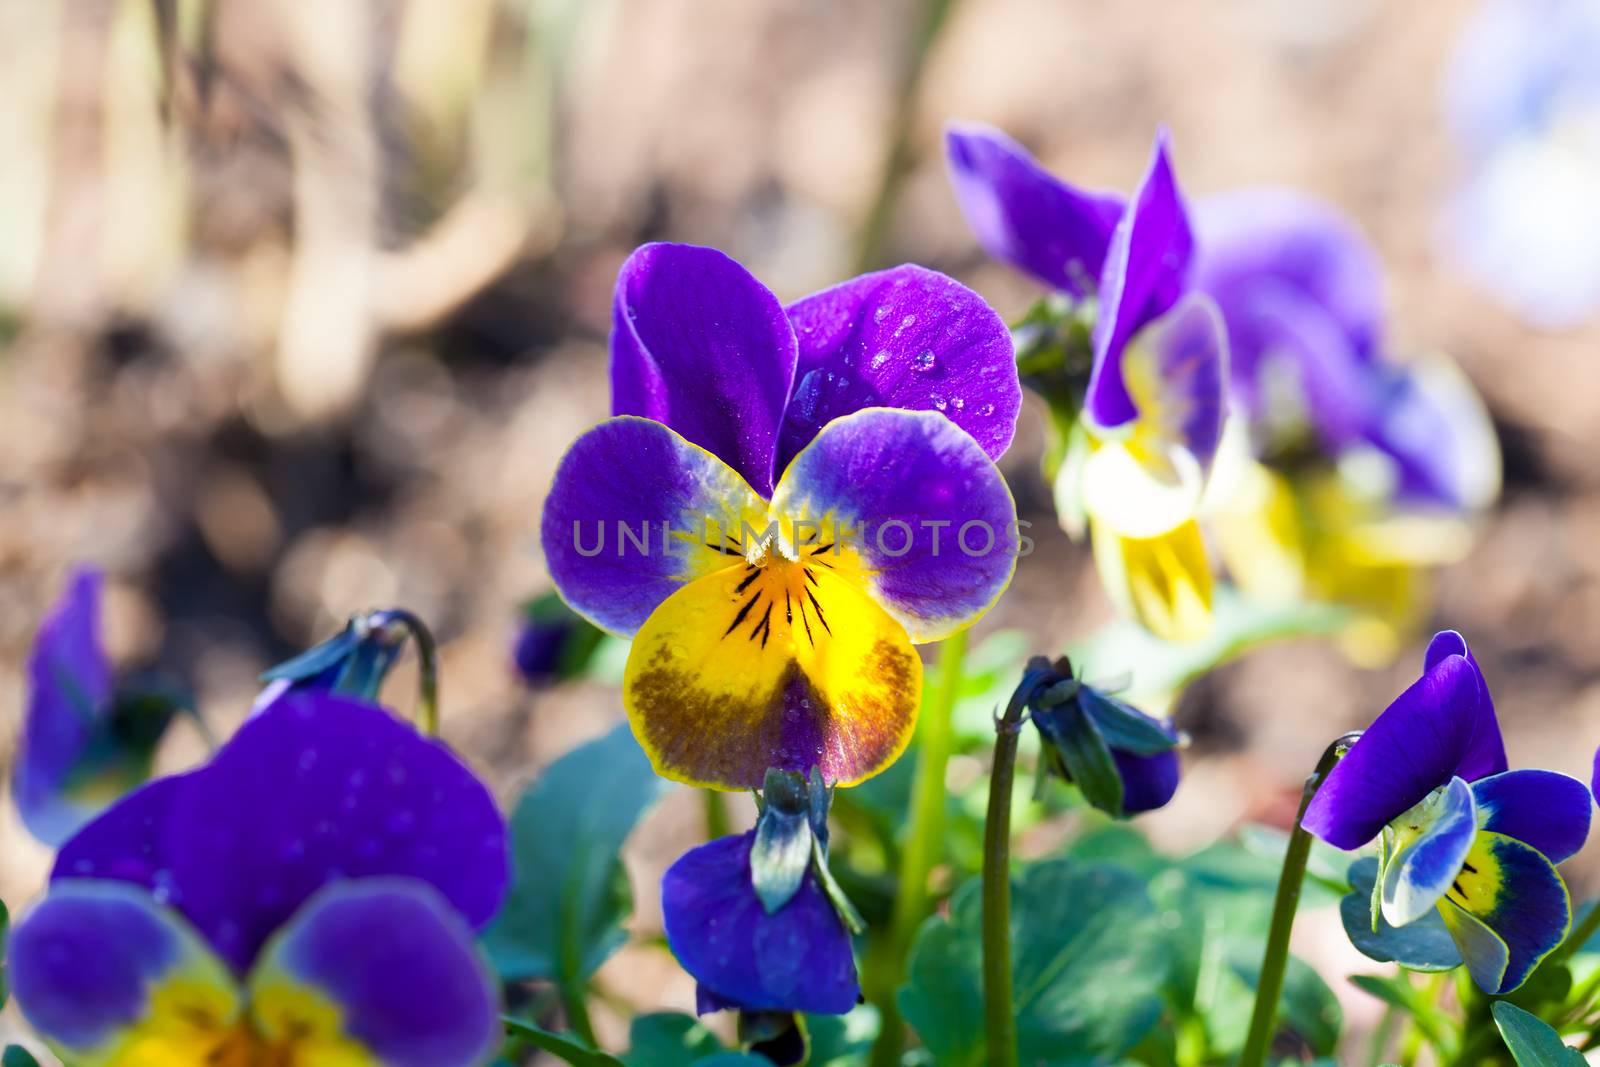 garden pansy (pansies, Viola, Viola tricolor) is a type of large-flowered hybrid plant cultivated as a garden flower.